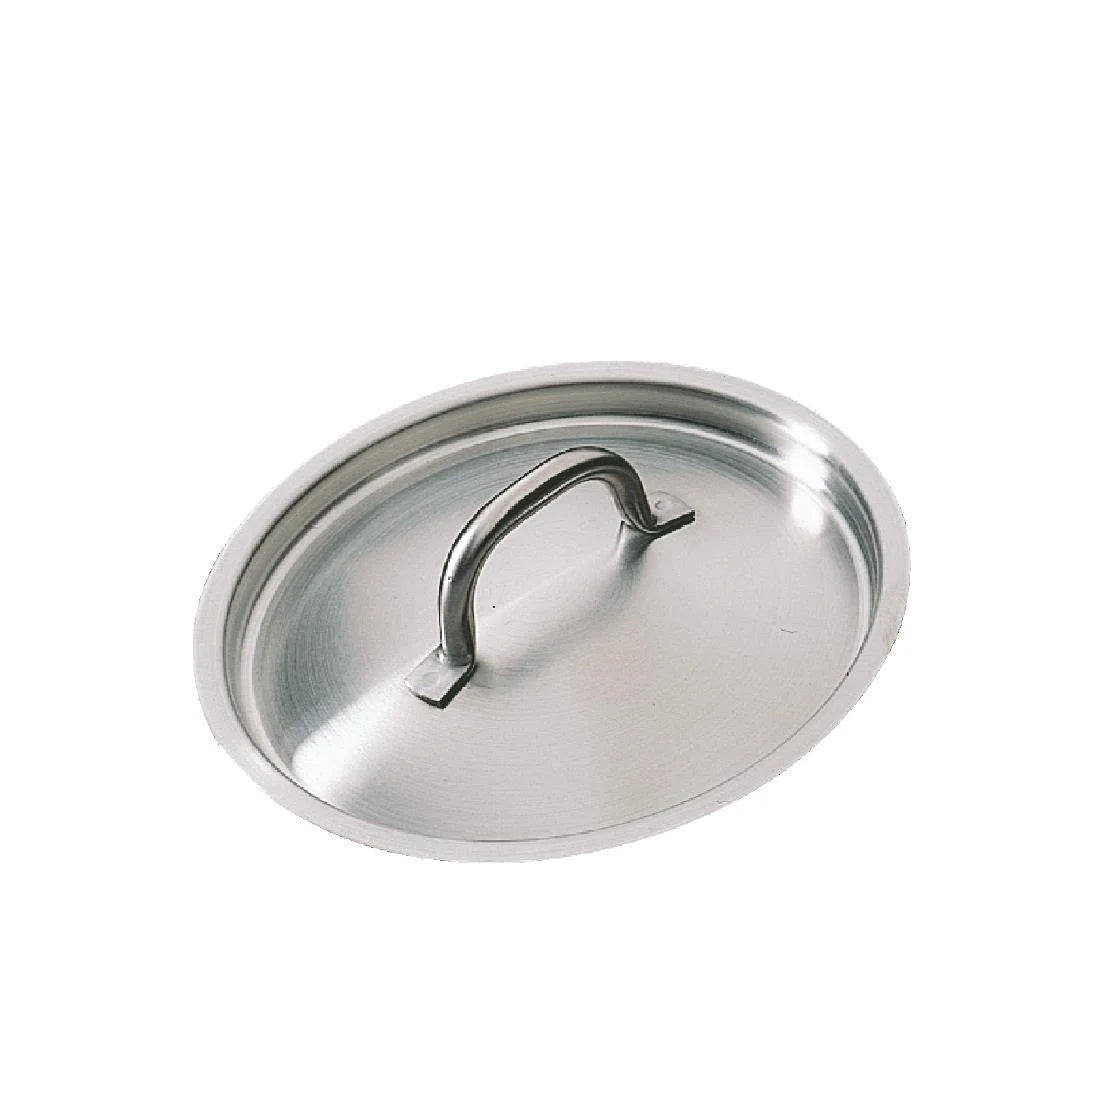 Bourgeat Stainless Steel Saucepan Lid 400mm JD Catering Equipment Solutions Ltd